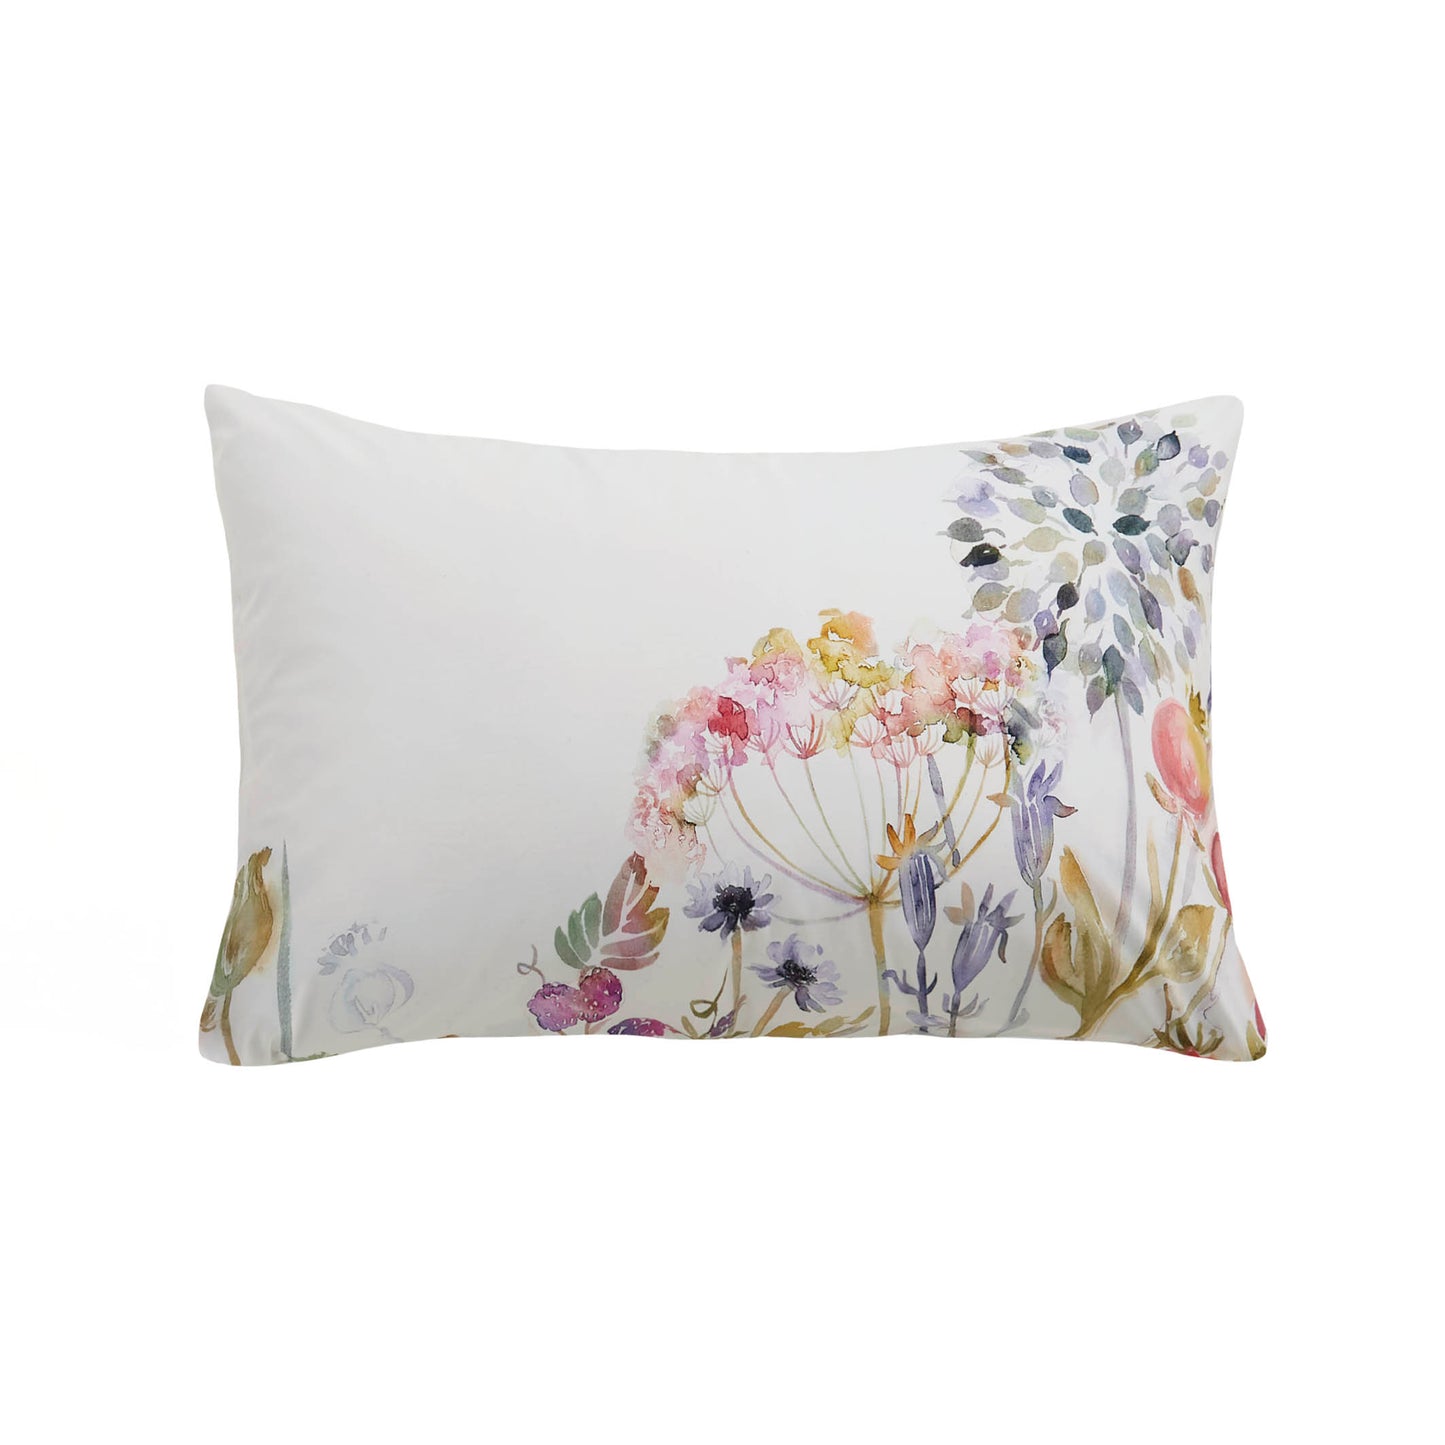 Voyage Country Hedgerow Cream Floral 100% Cotton Housewife Pillowcase Pair